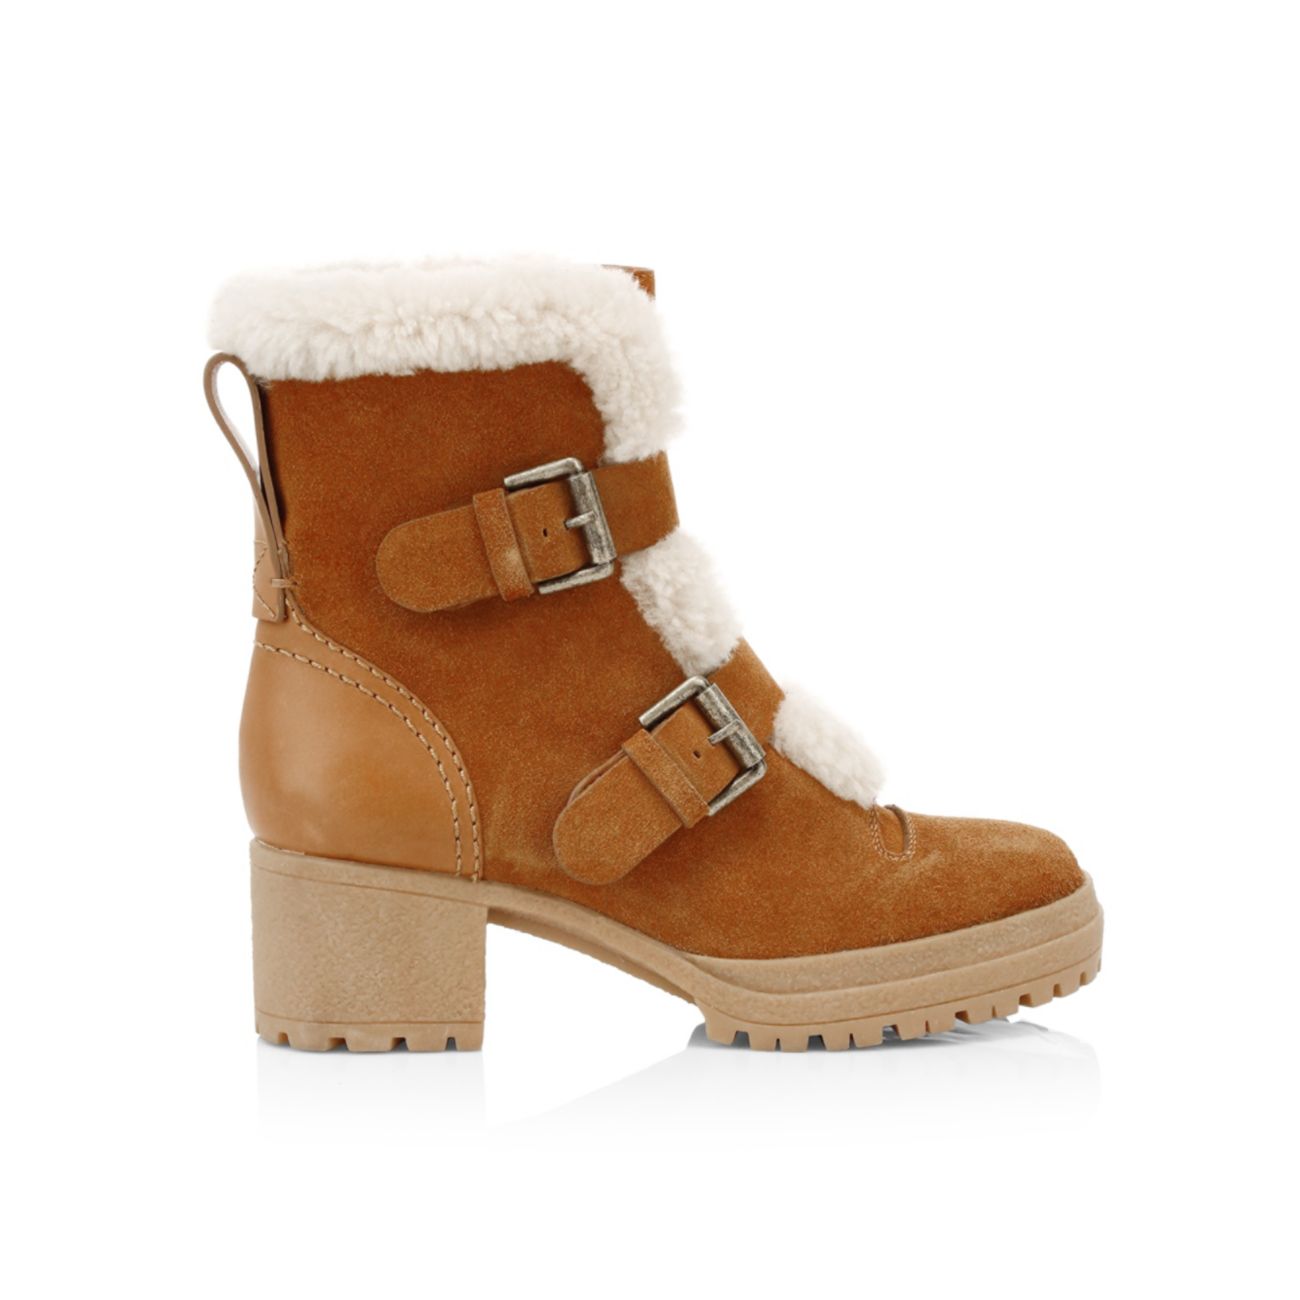 Shearling-Lined Suede Hiking Boots See by Chloe